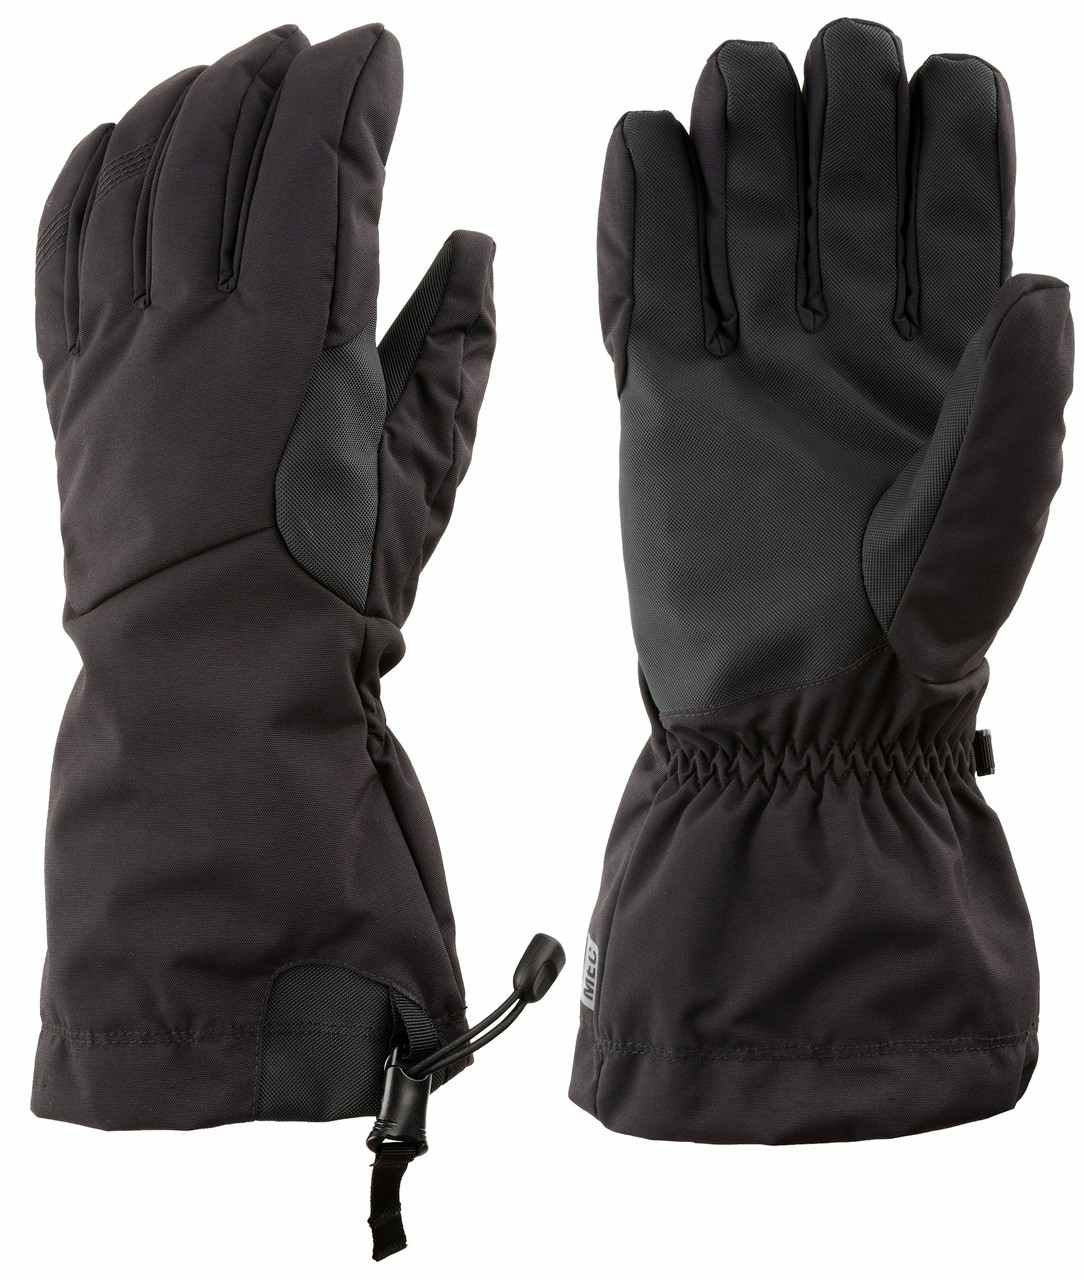 Overlord Gloves Black